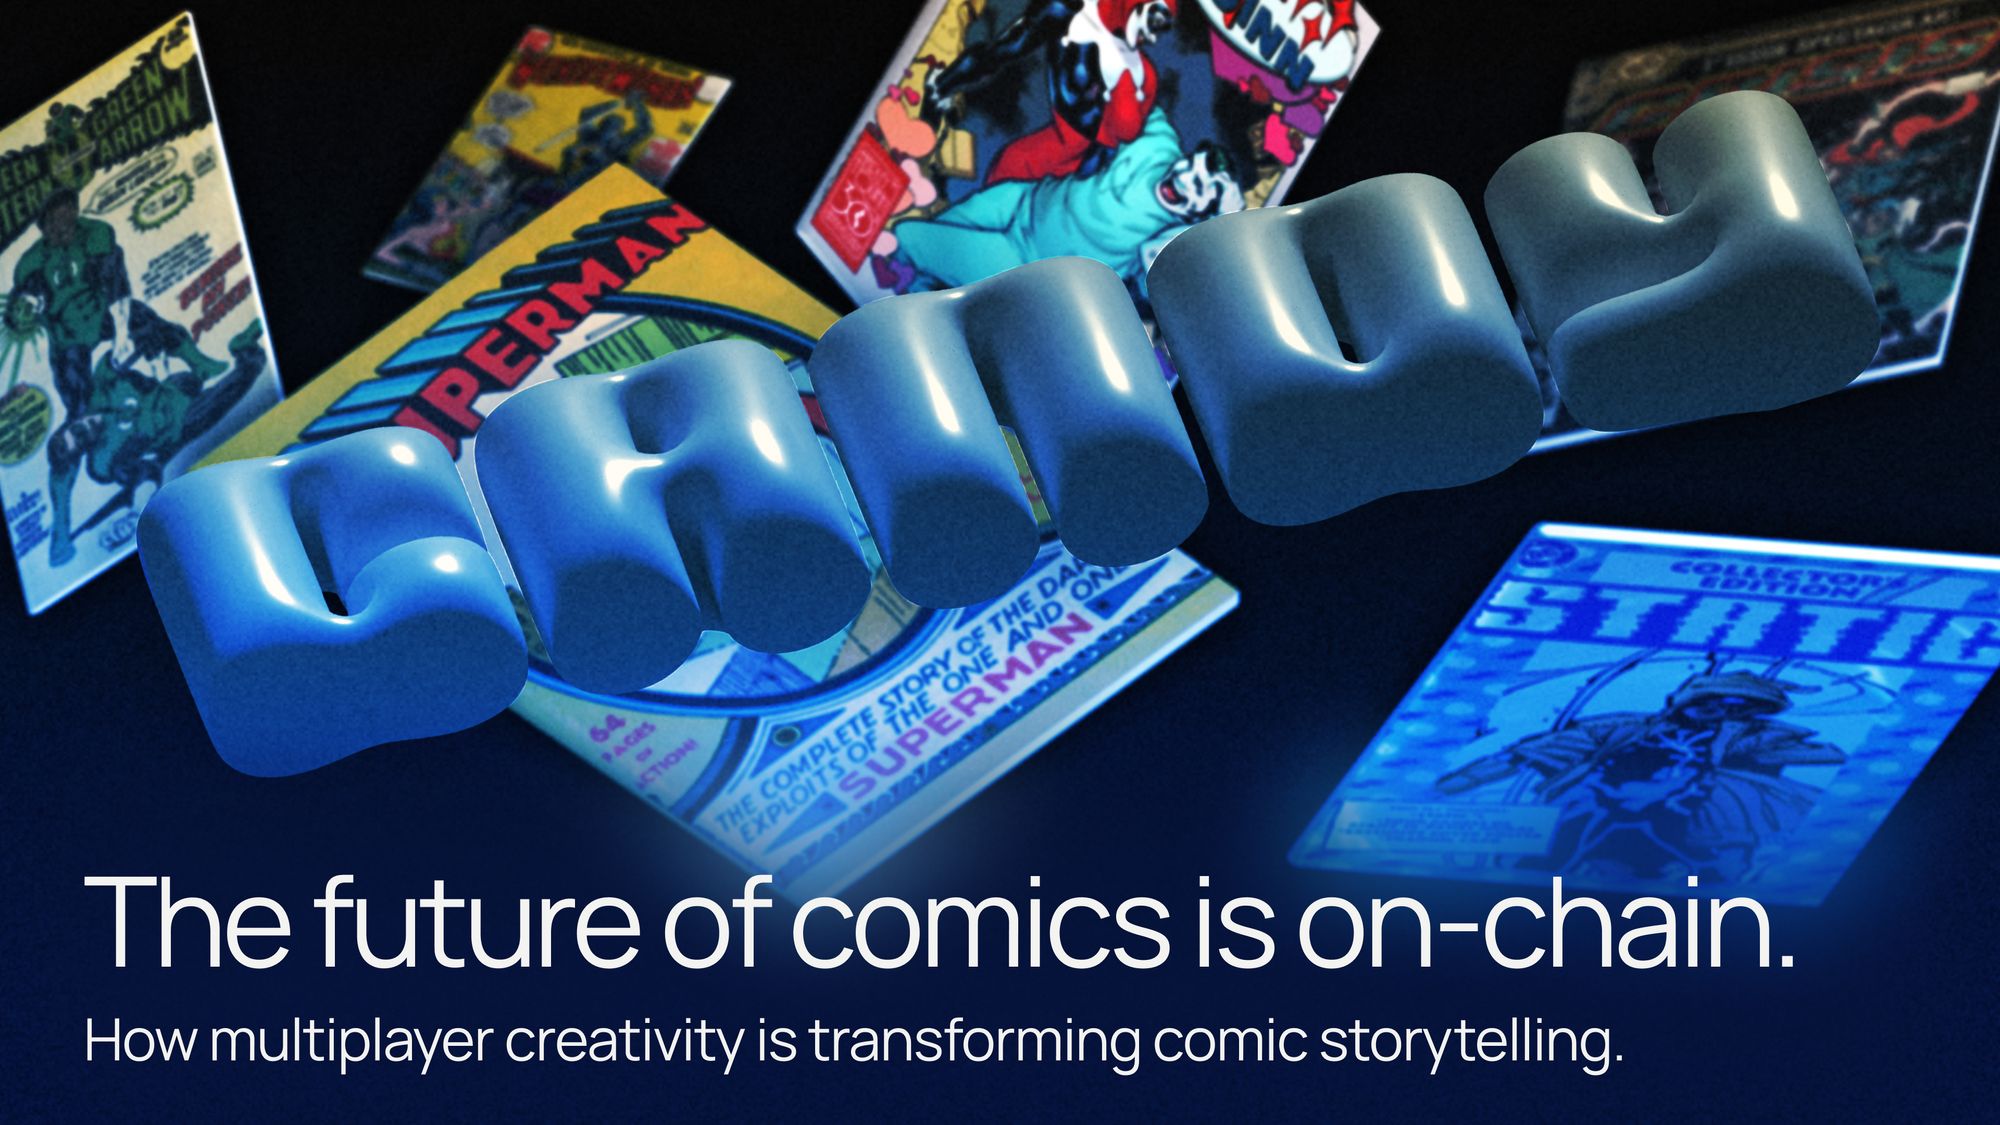 How Multiplayer Creativity is Transforming Comic Storytelling